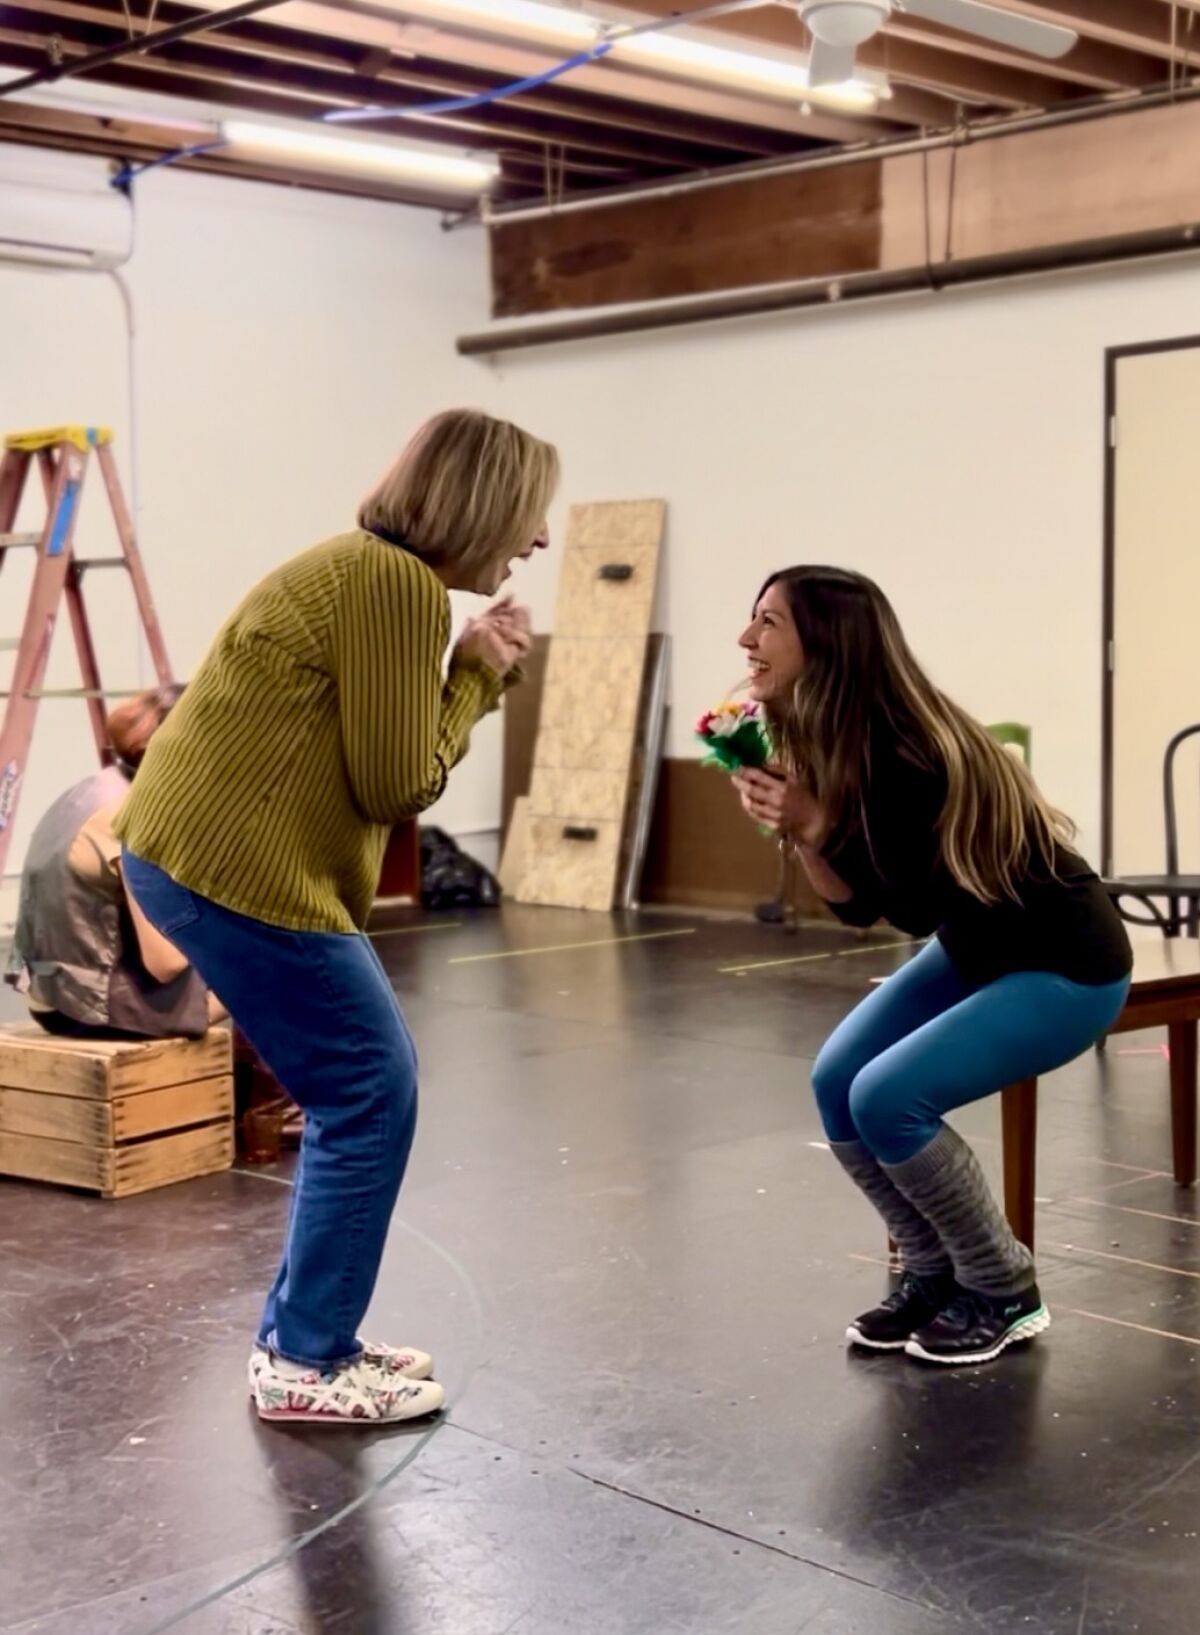 Two women in street clothes talk excitedly while rehearsing a scene